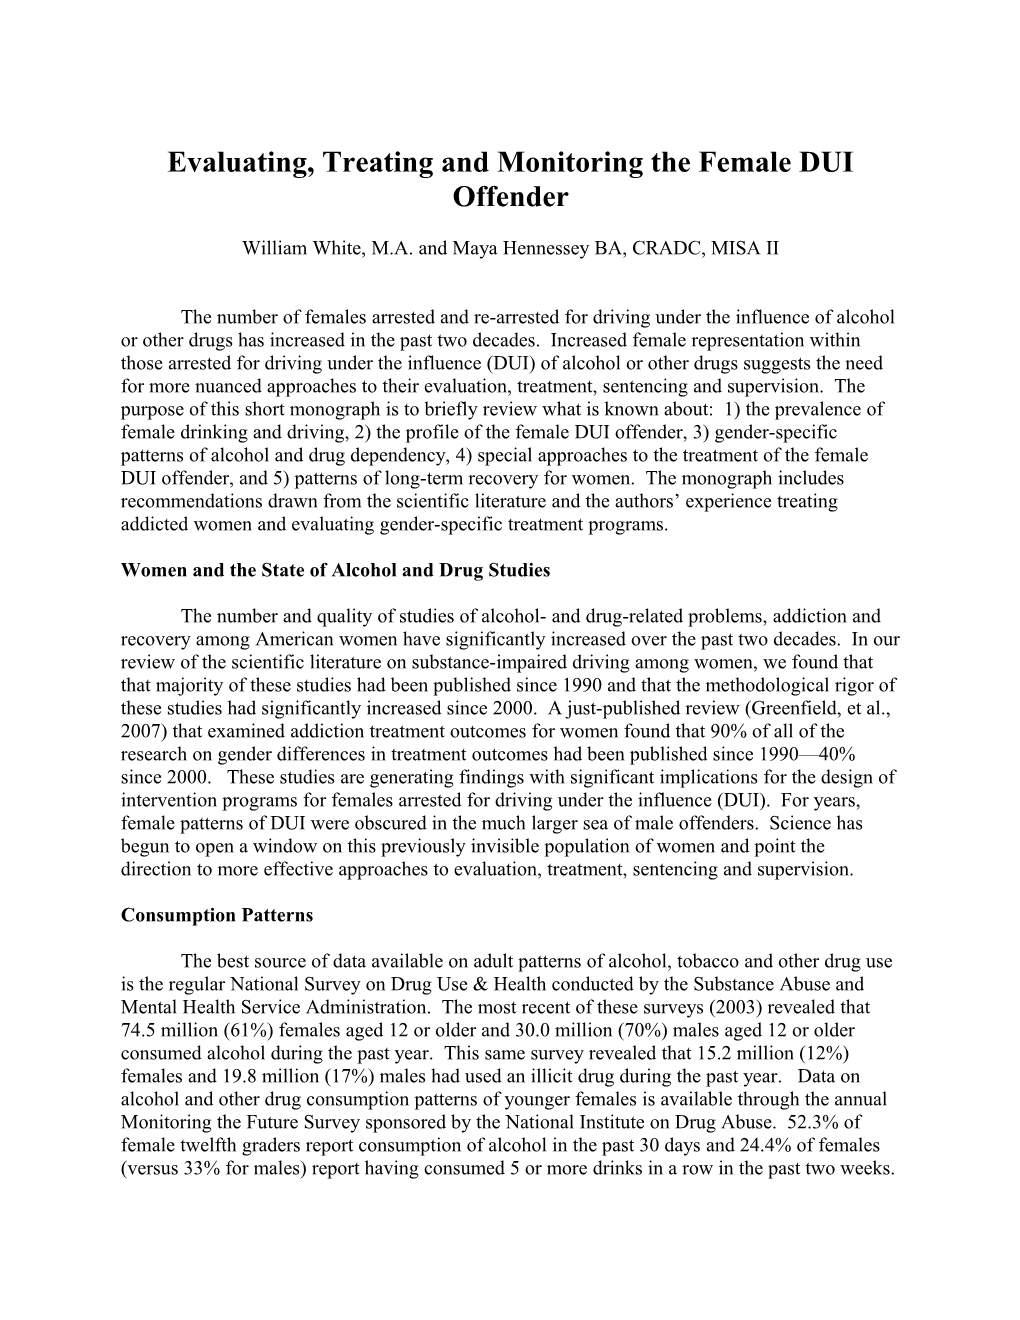 Evaluating, Treating and Monitoring the Female DUI Offender